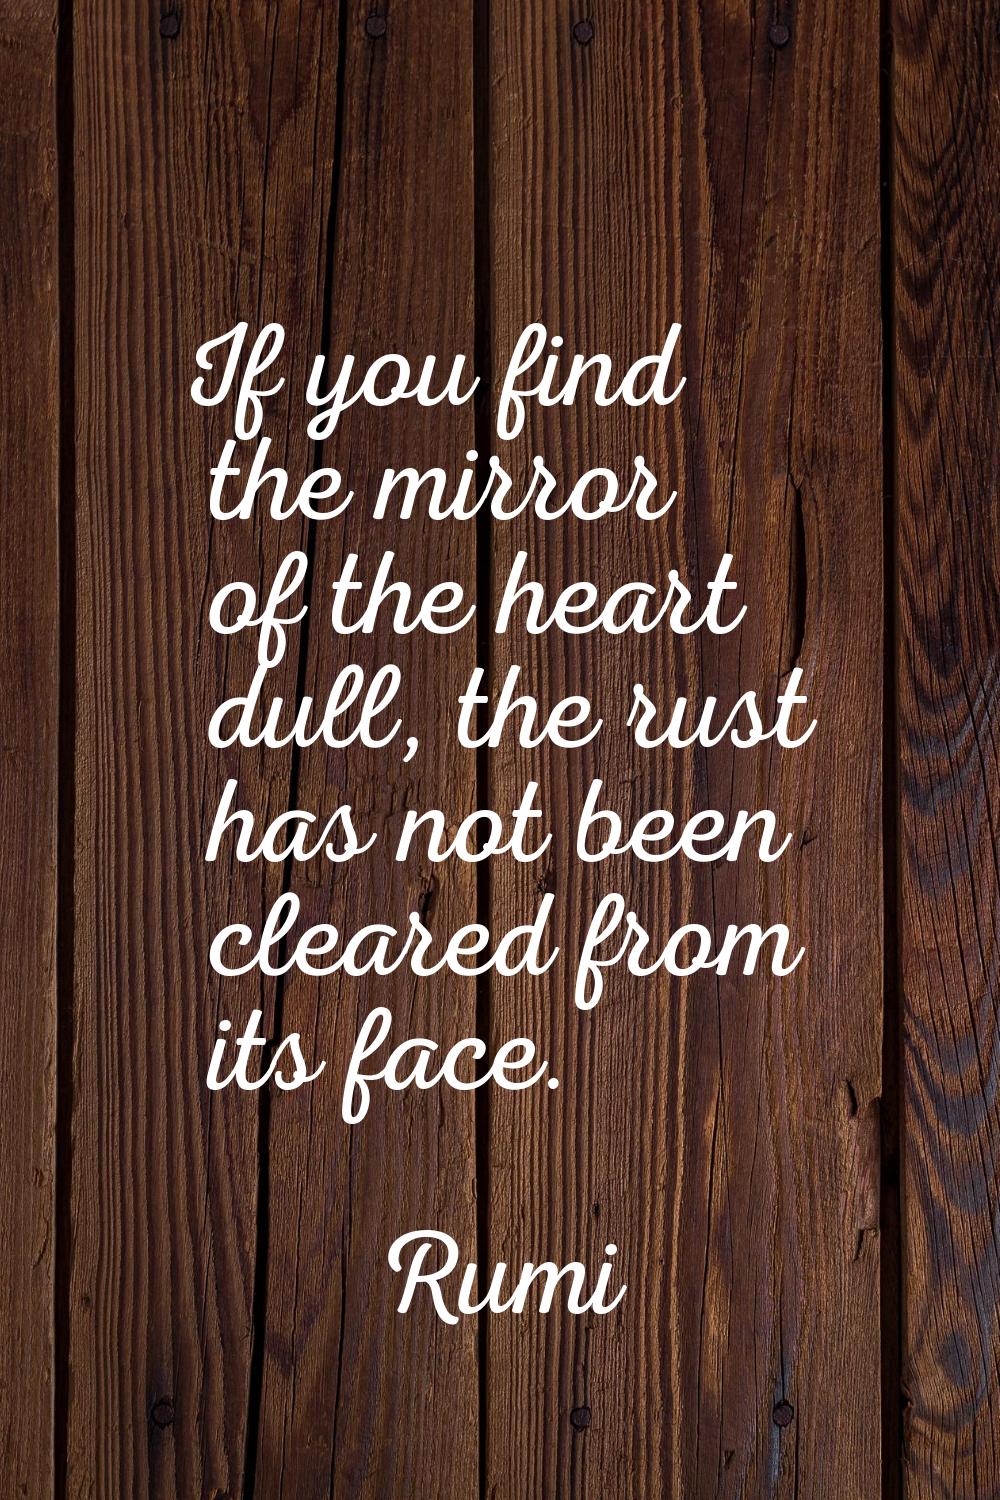 If you find the mirror of the heart dull, the rust has not been cleared from its face.